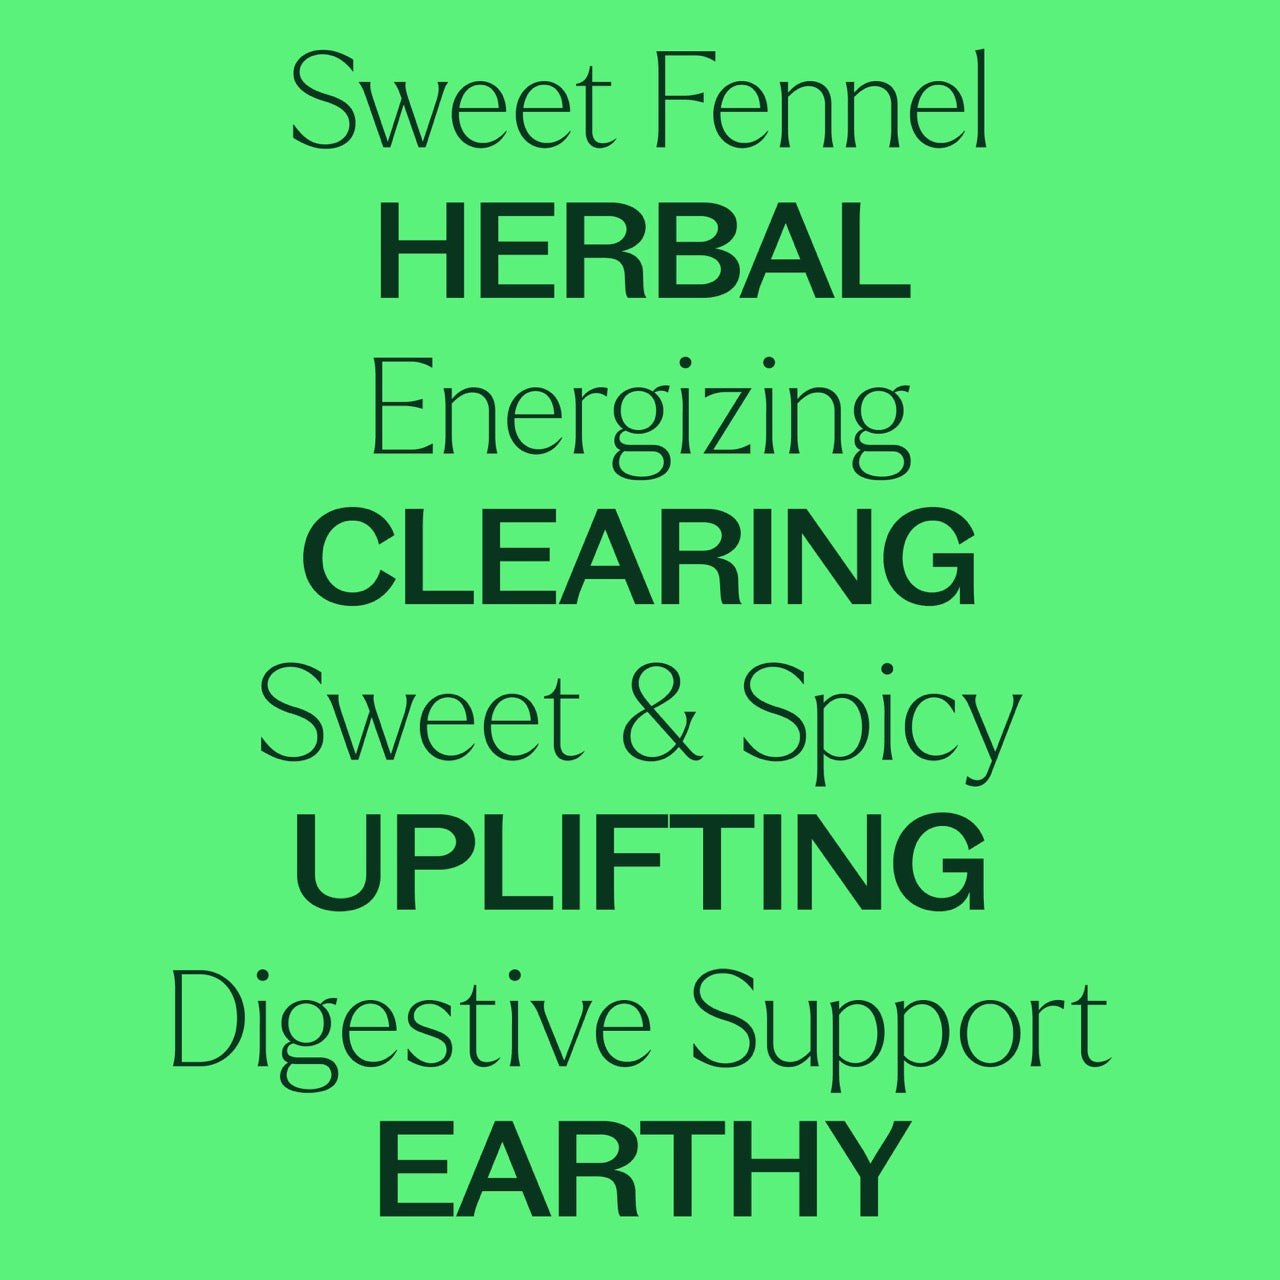 Sweet Fennel Essential Oil key feature: Herbal, energizing, clearing, sweet and spicy, upliting, digestive support, and earthy